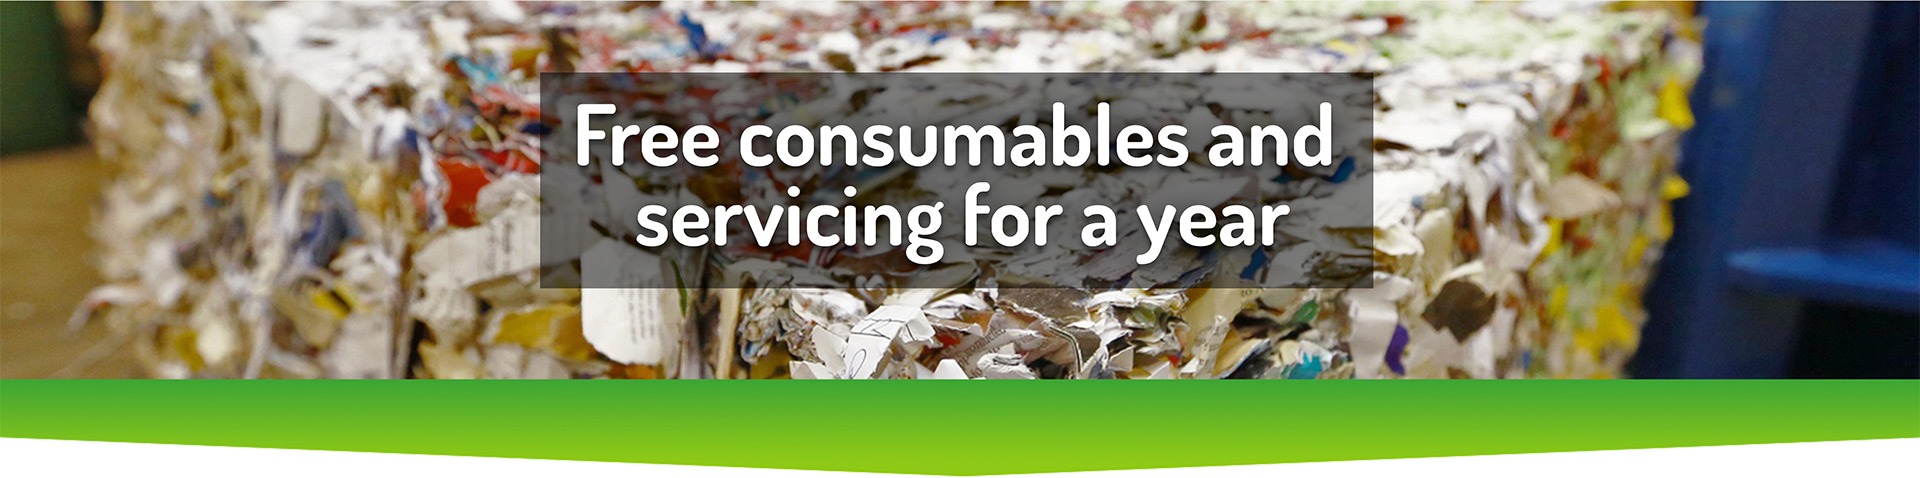 Free consumbales are servicing for a year